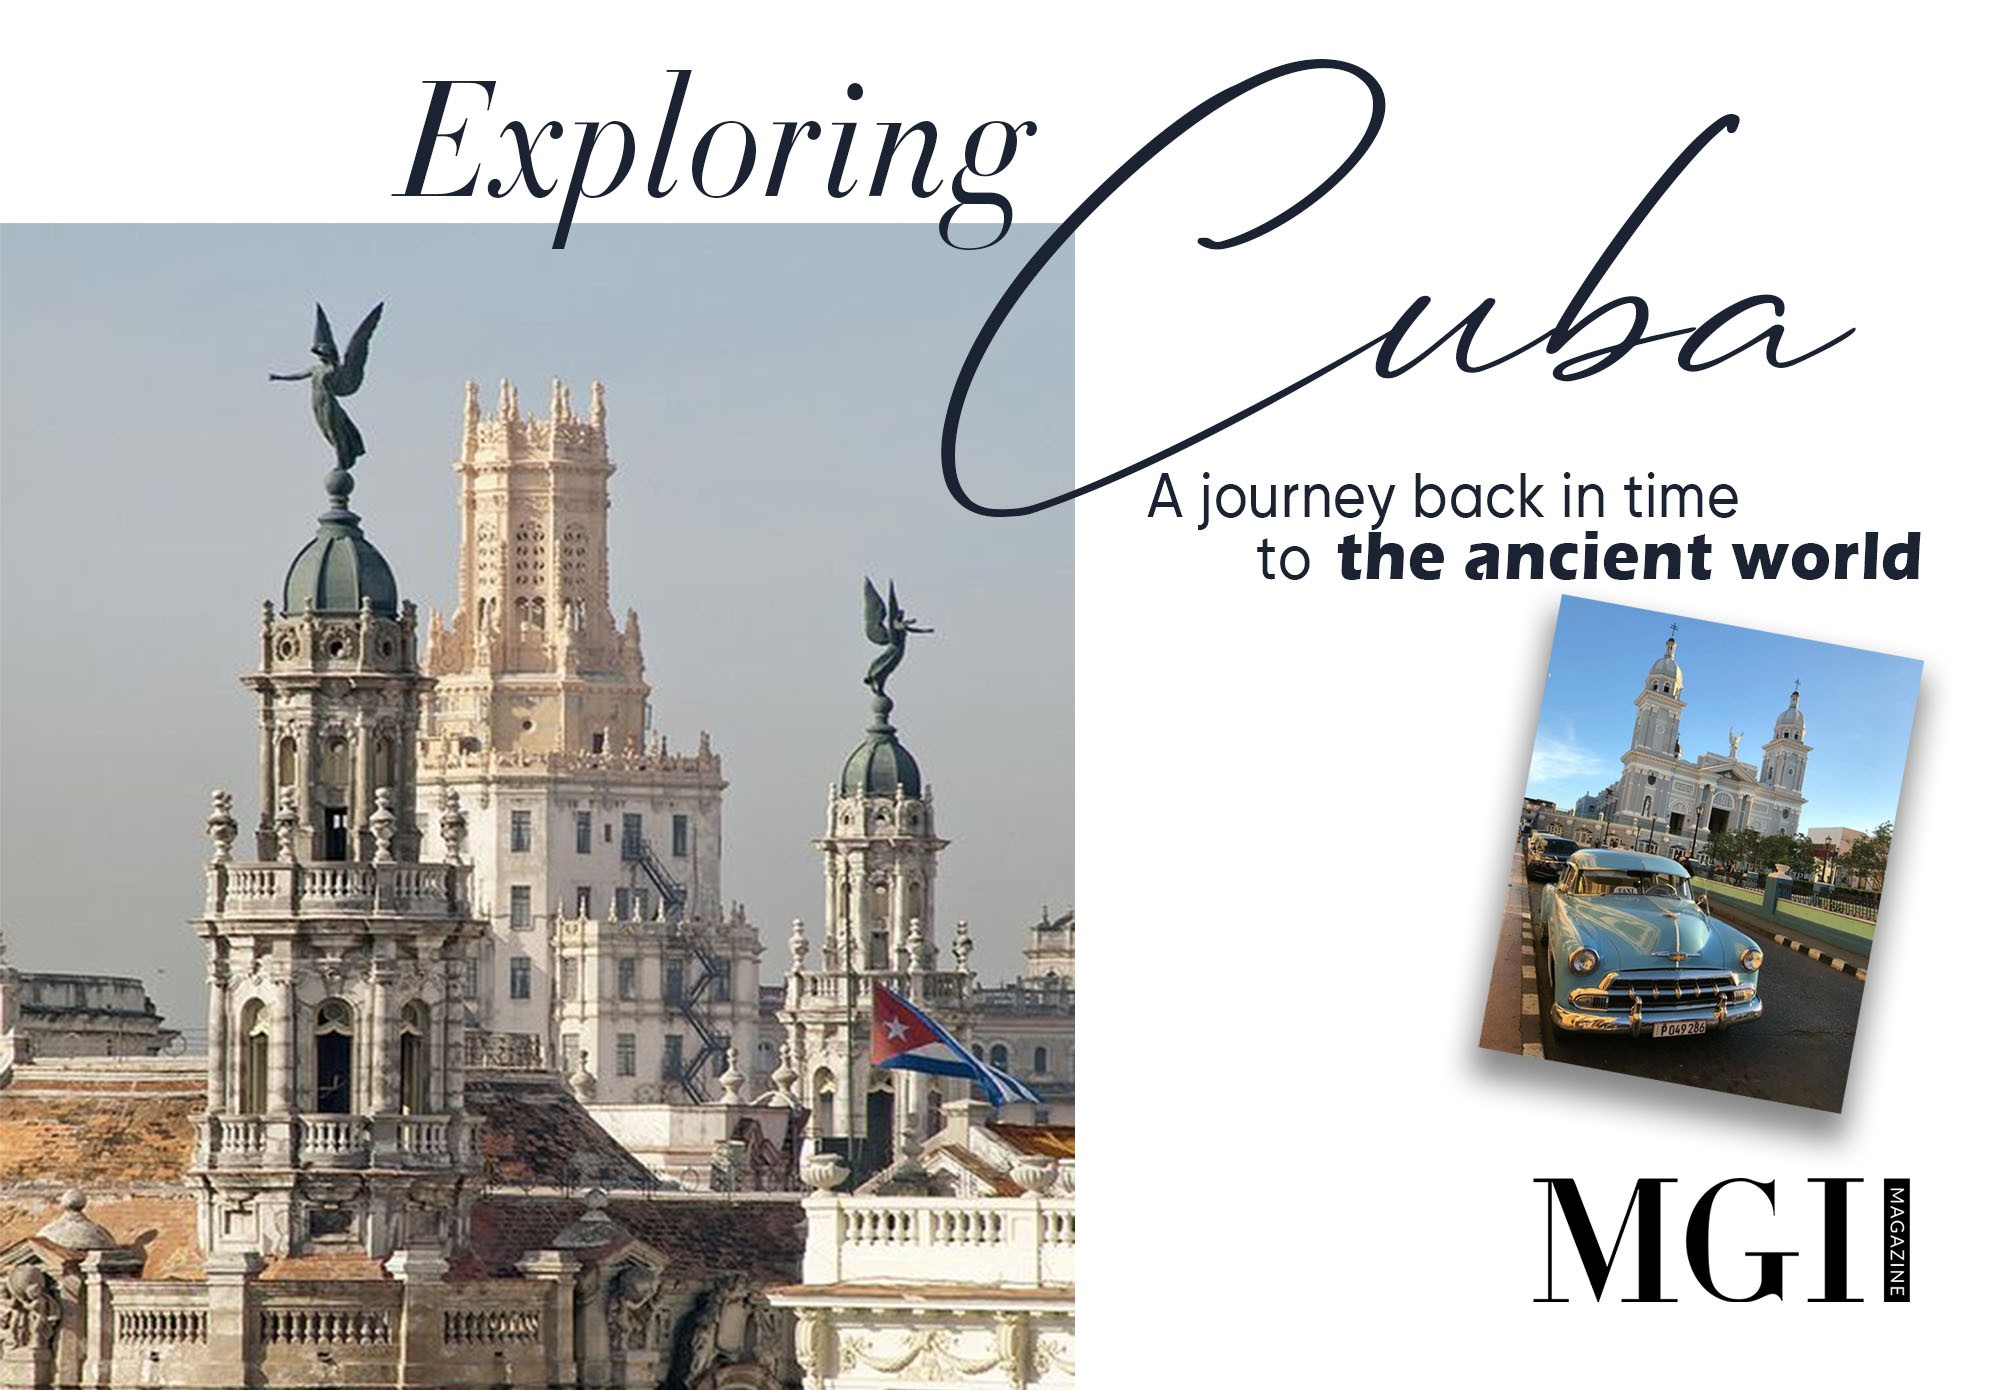 Exploring Cuba - a journey back in time to the ancient world